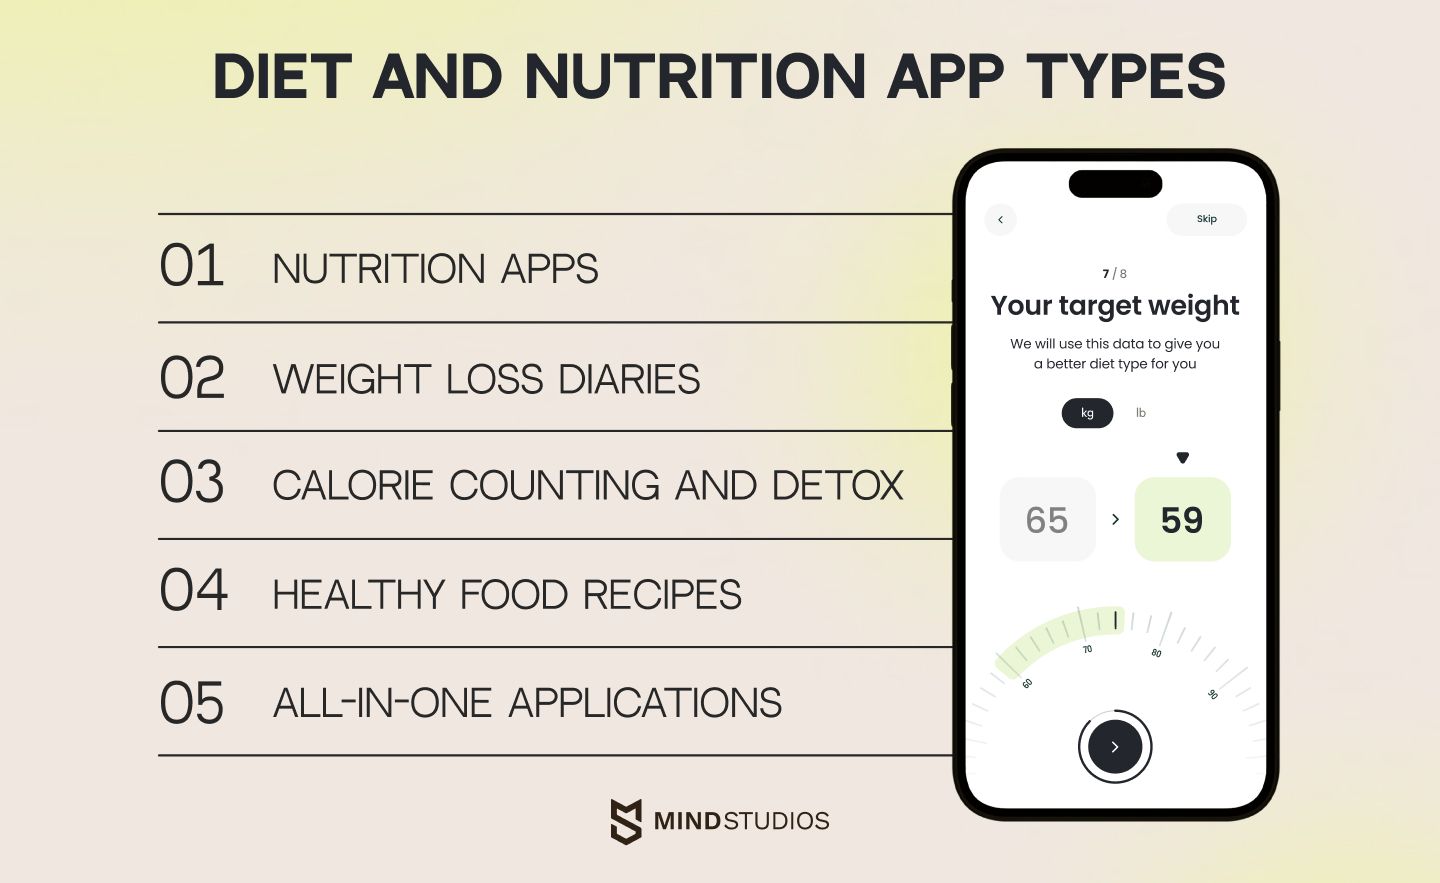 Diet and nutrition app types